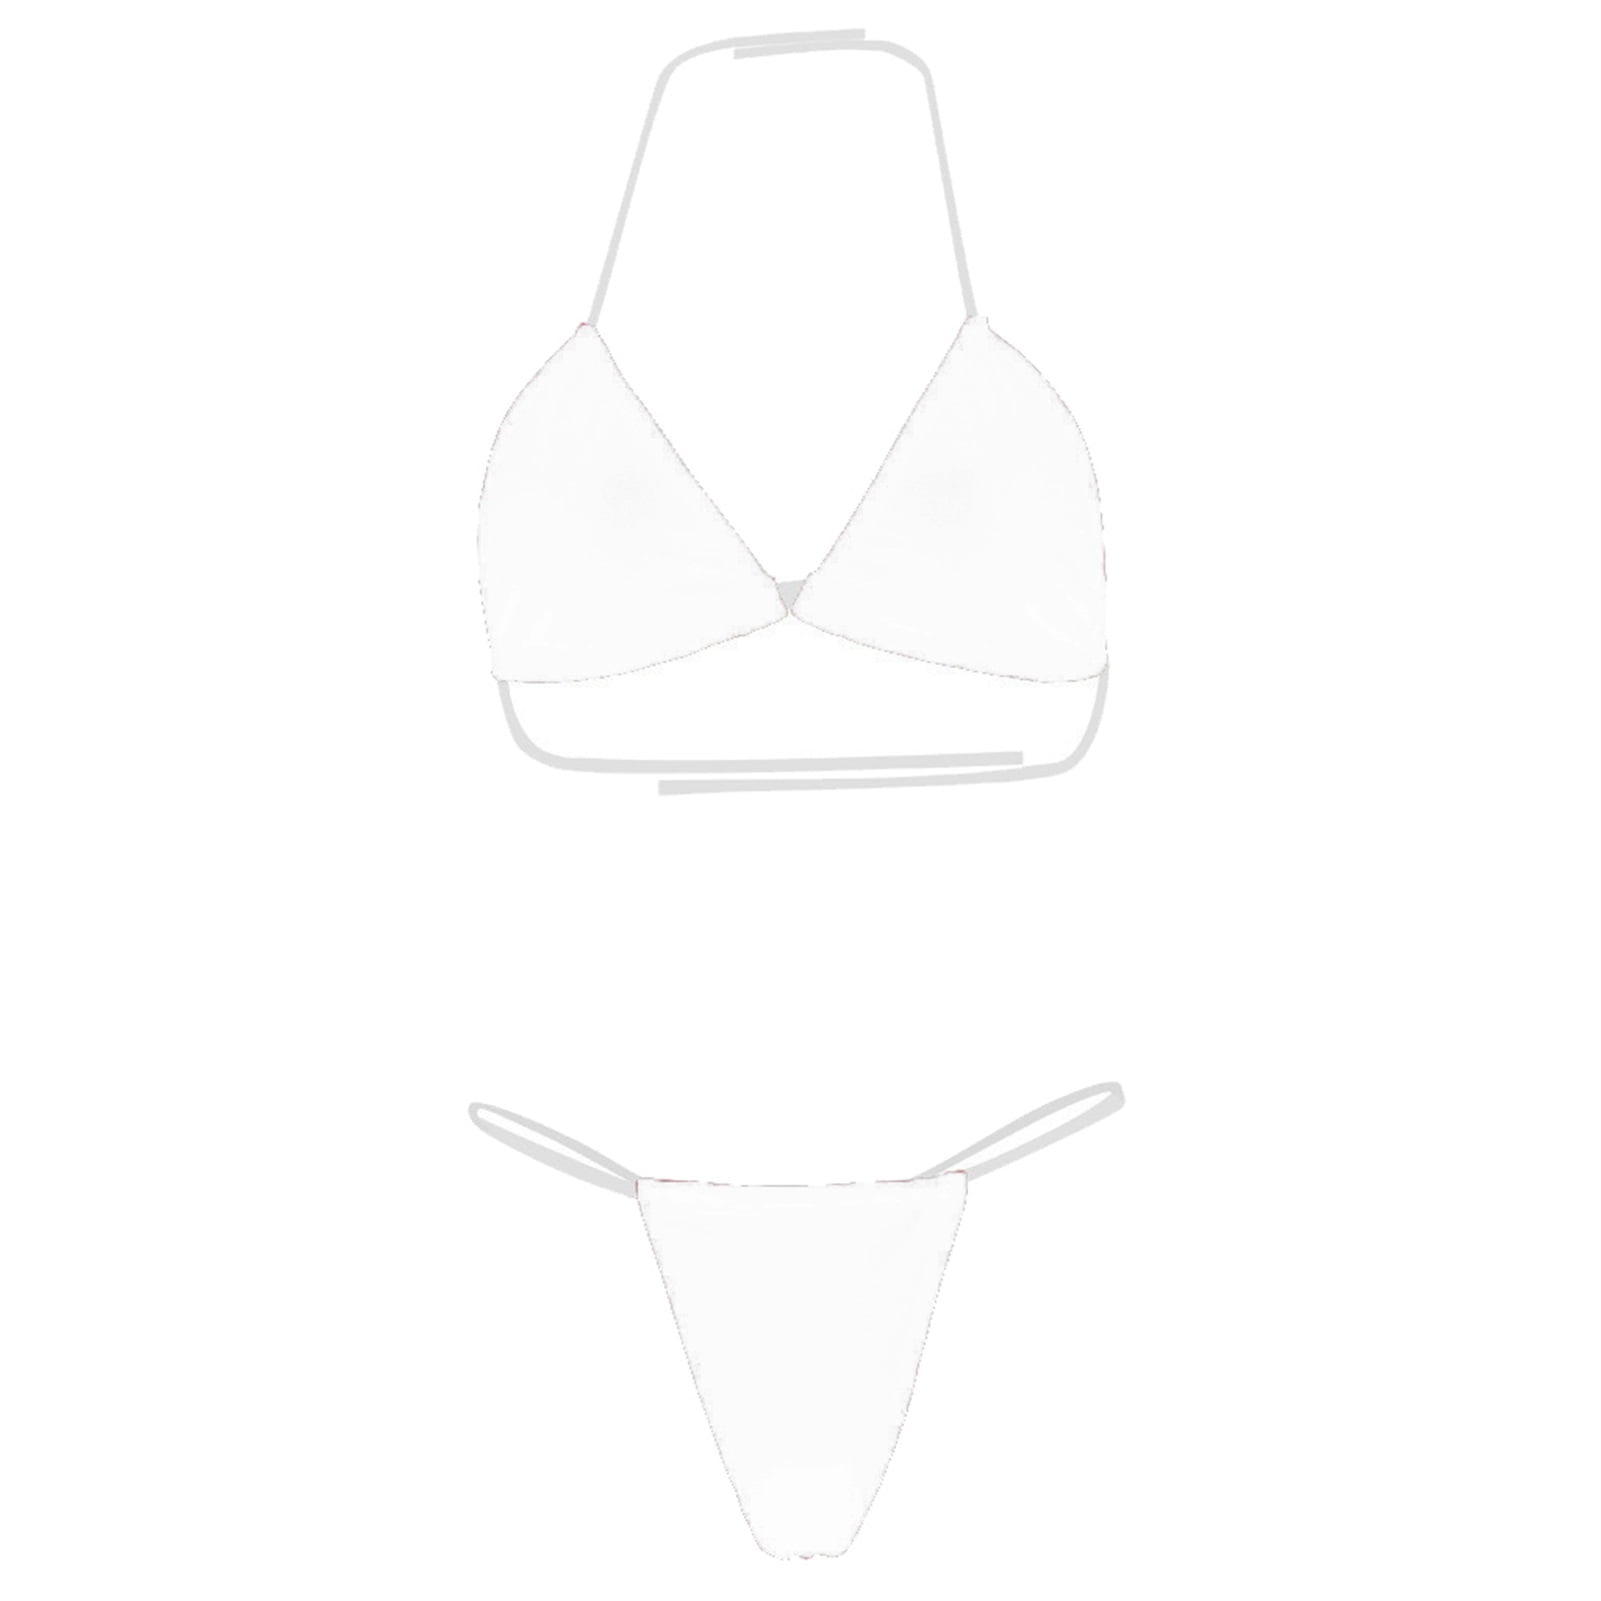 Womens Halter Bikini Sets 2022 With Push Up Bra And High Waist Hollow  Triangle Panty Perfect For Summer Beach Swimwear From Peanutoil, $14.75